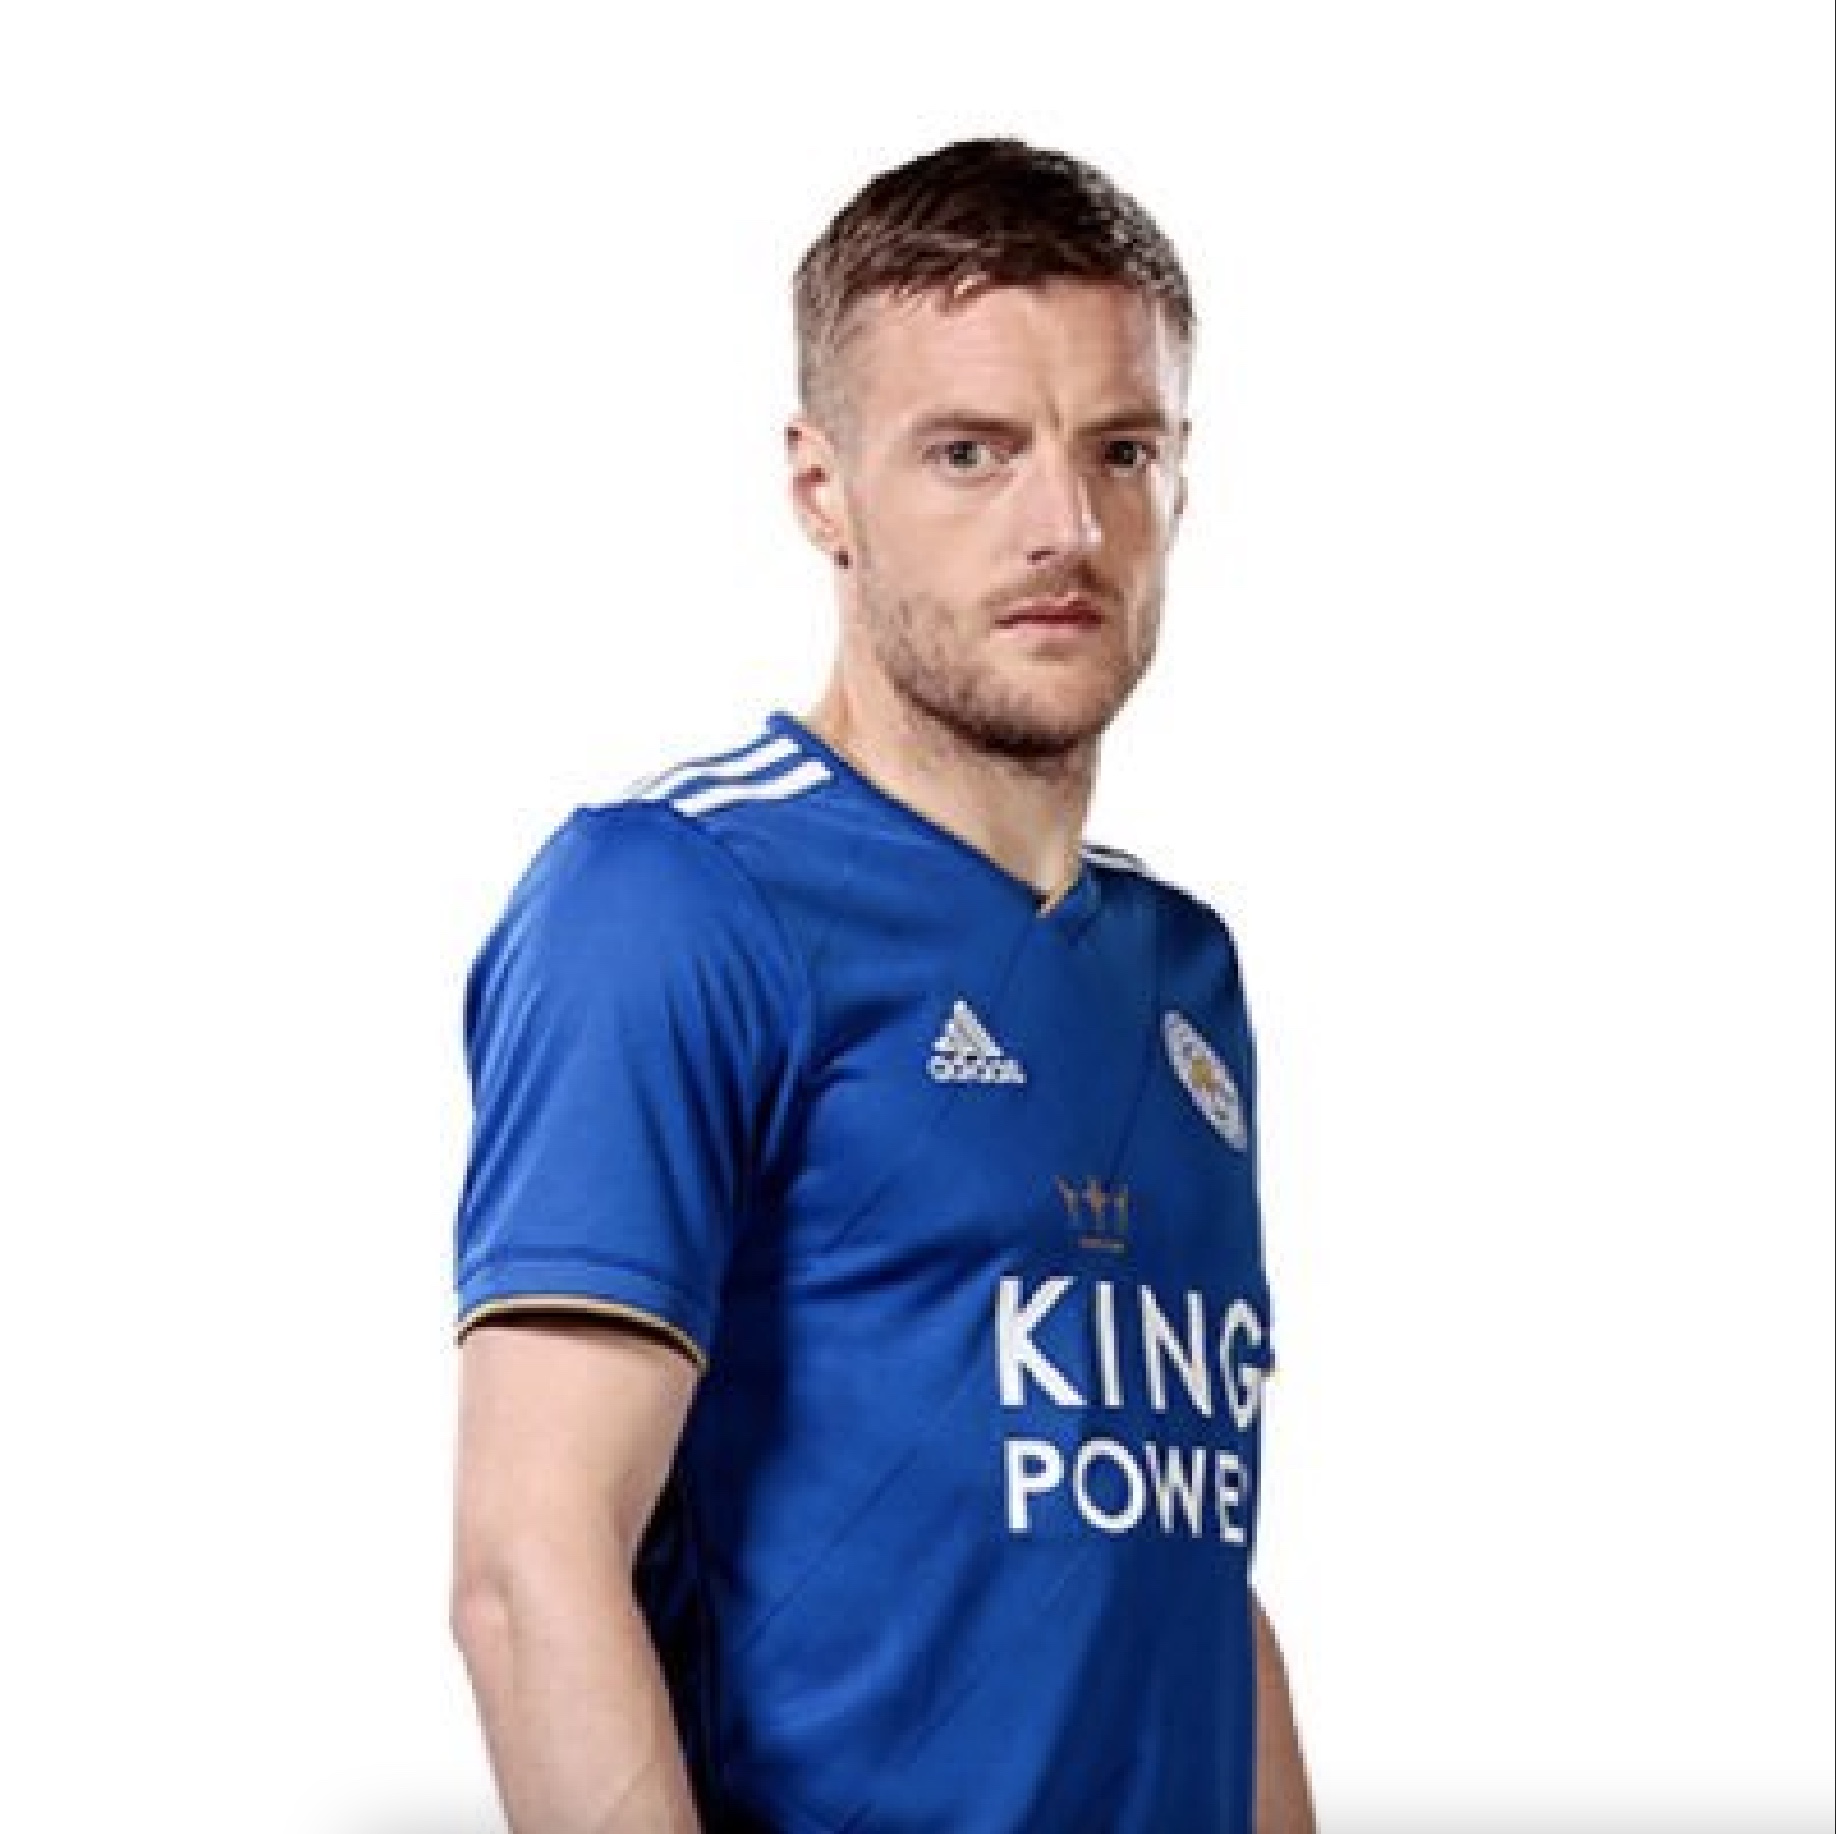 Sheffield Wednesday almost signed Jamie Vardy from Leicester for £5 Million